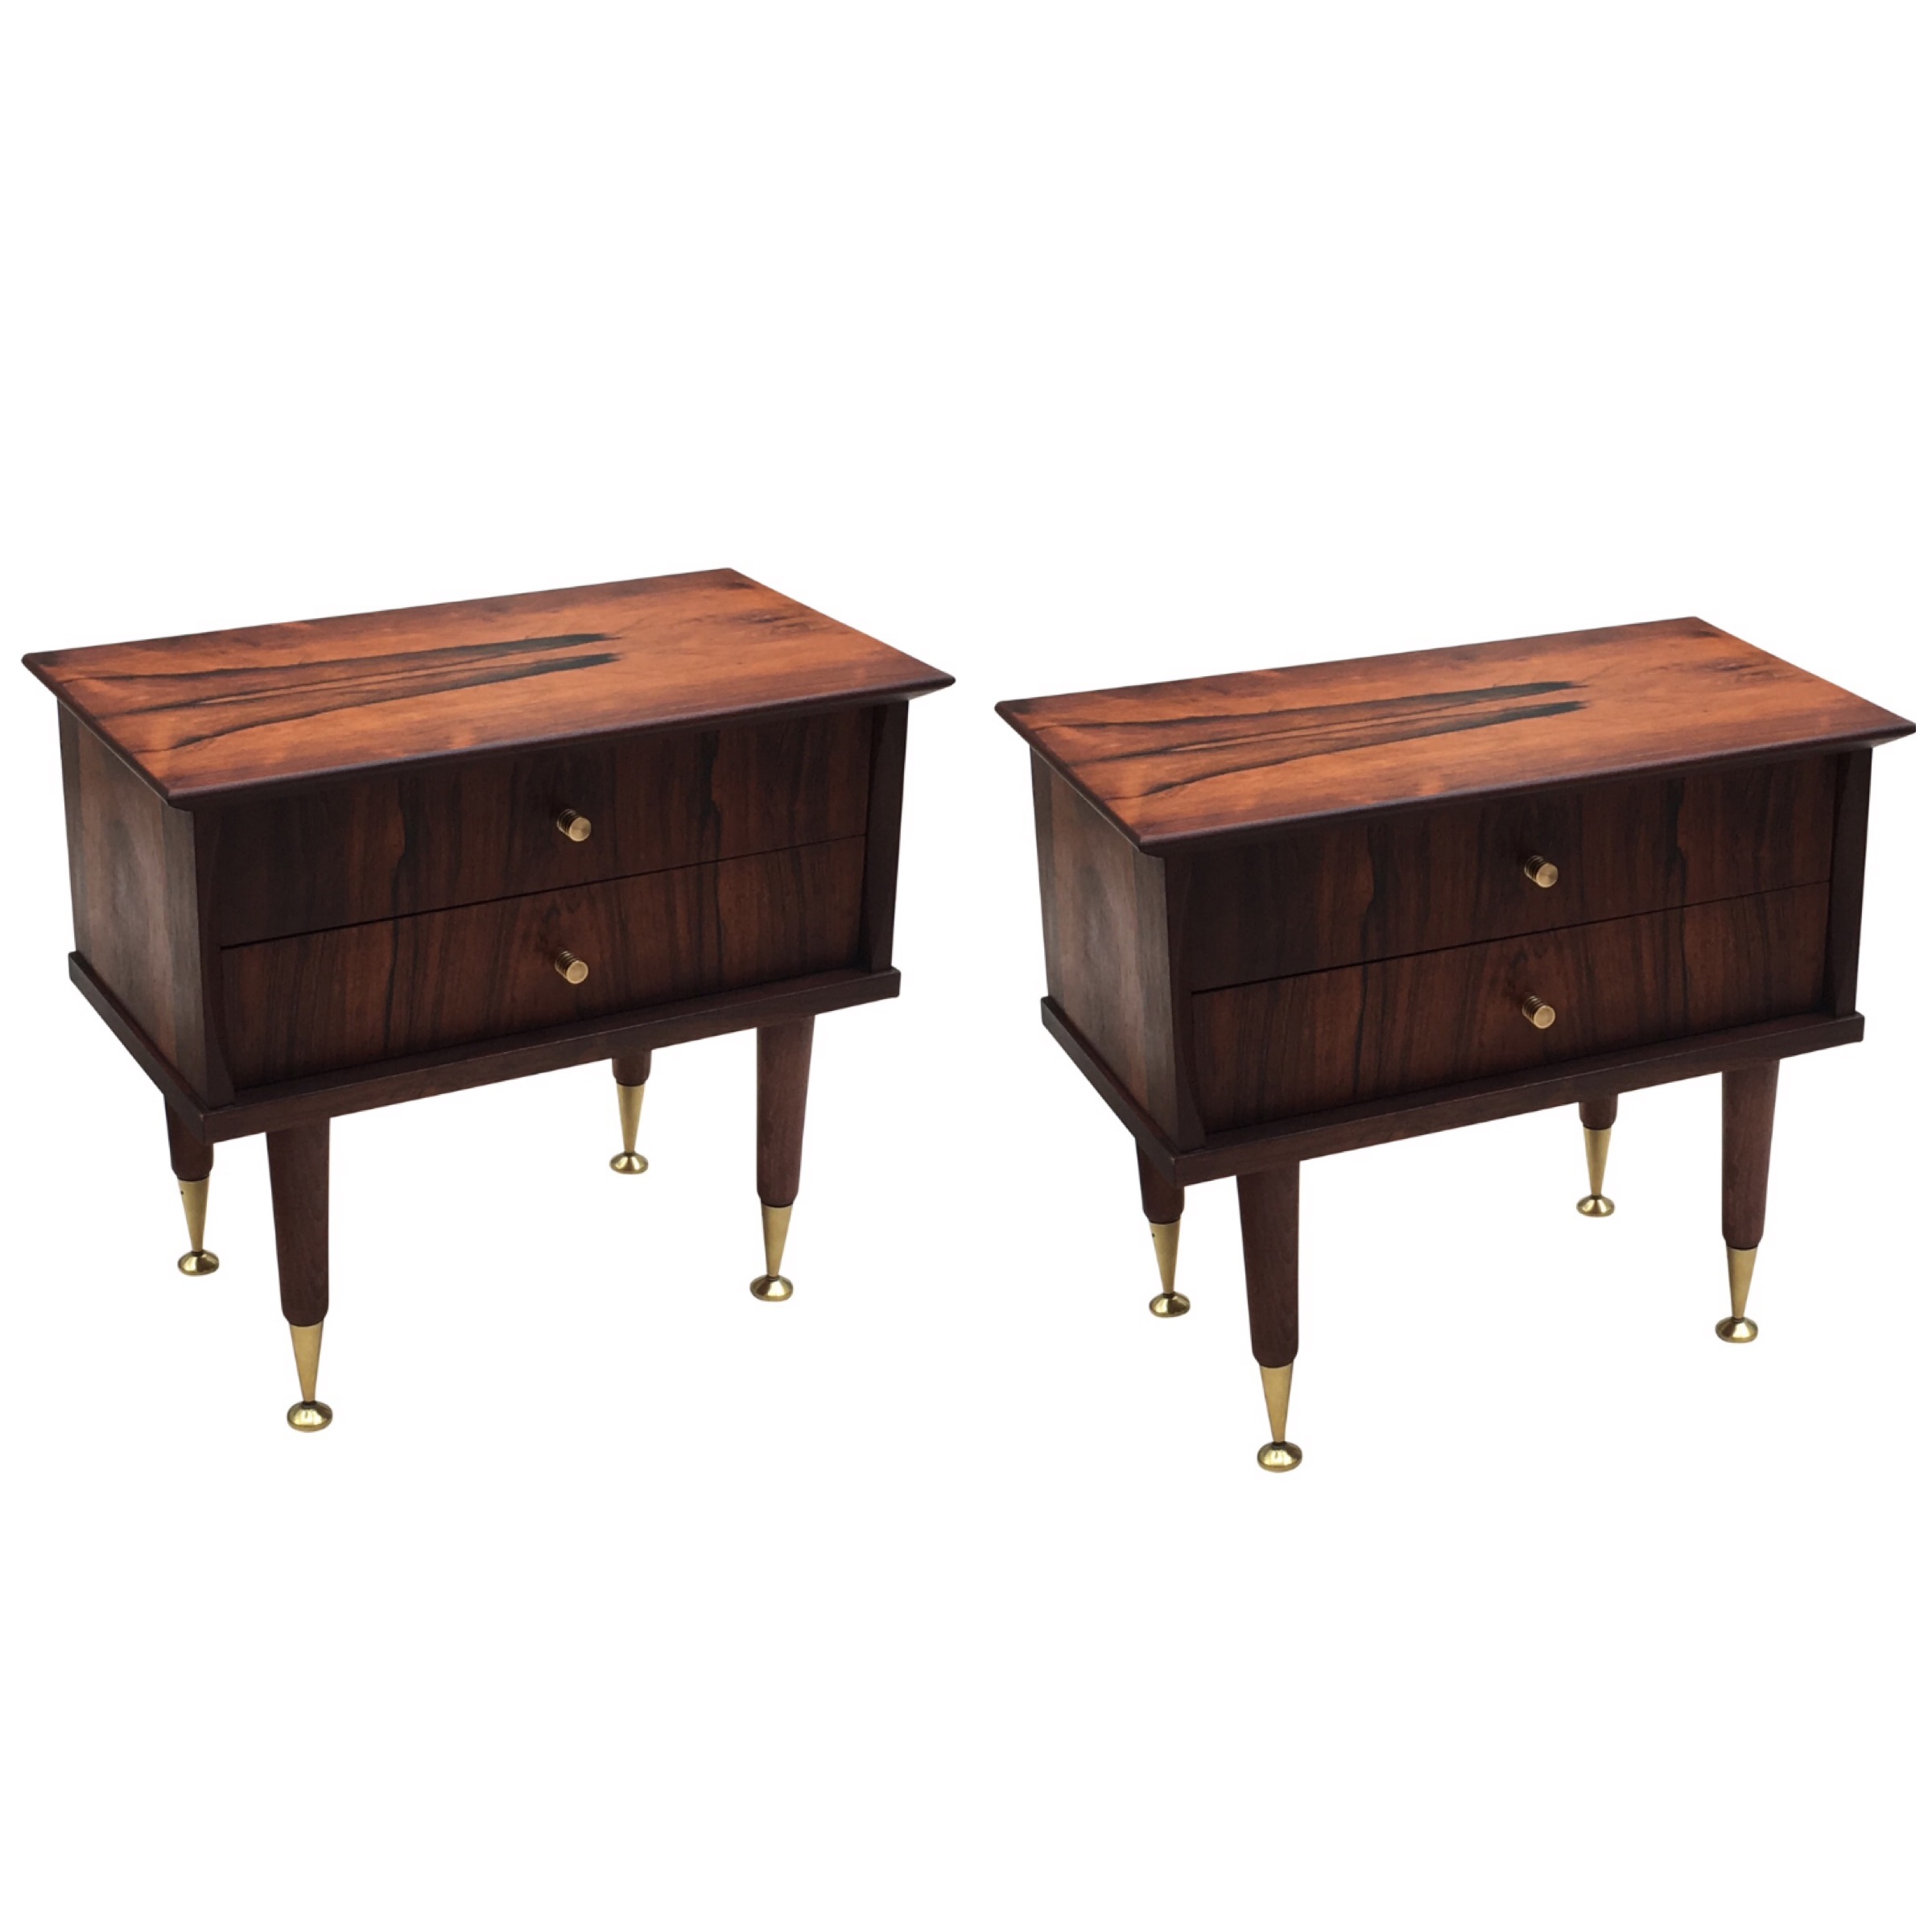 Rosewood bedside tables with 2 drawers each